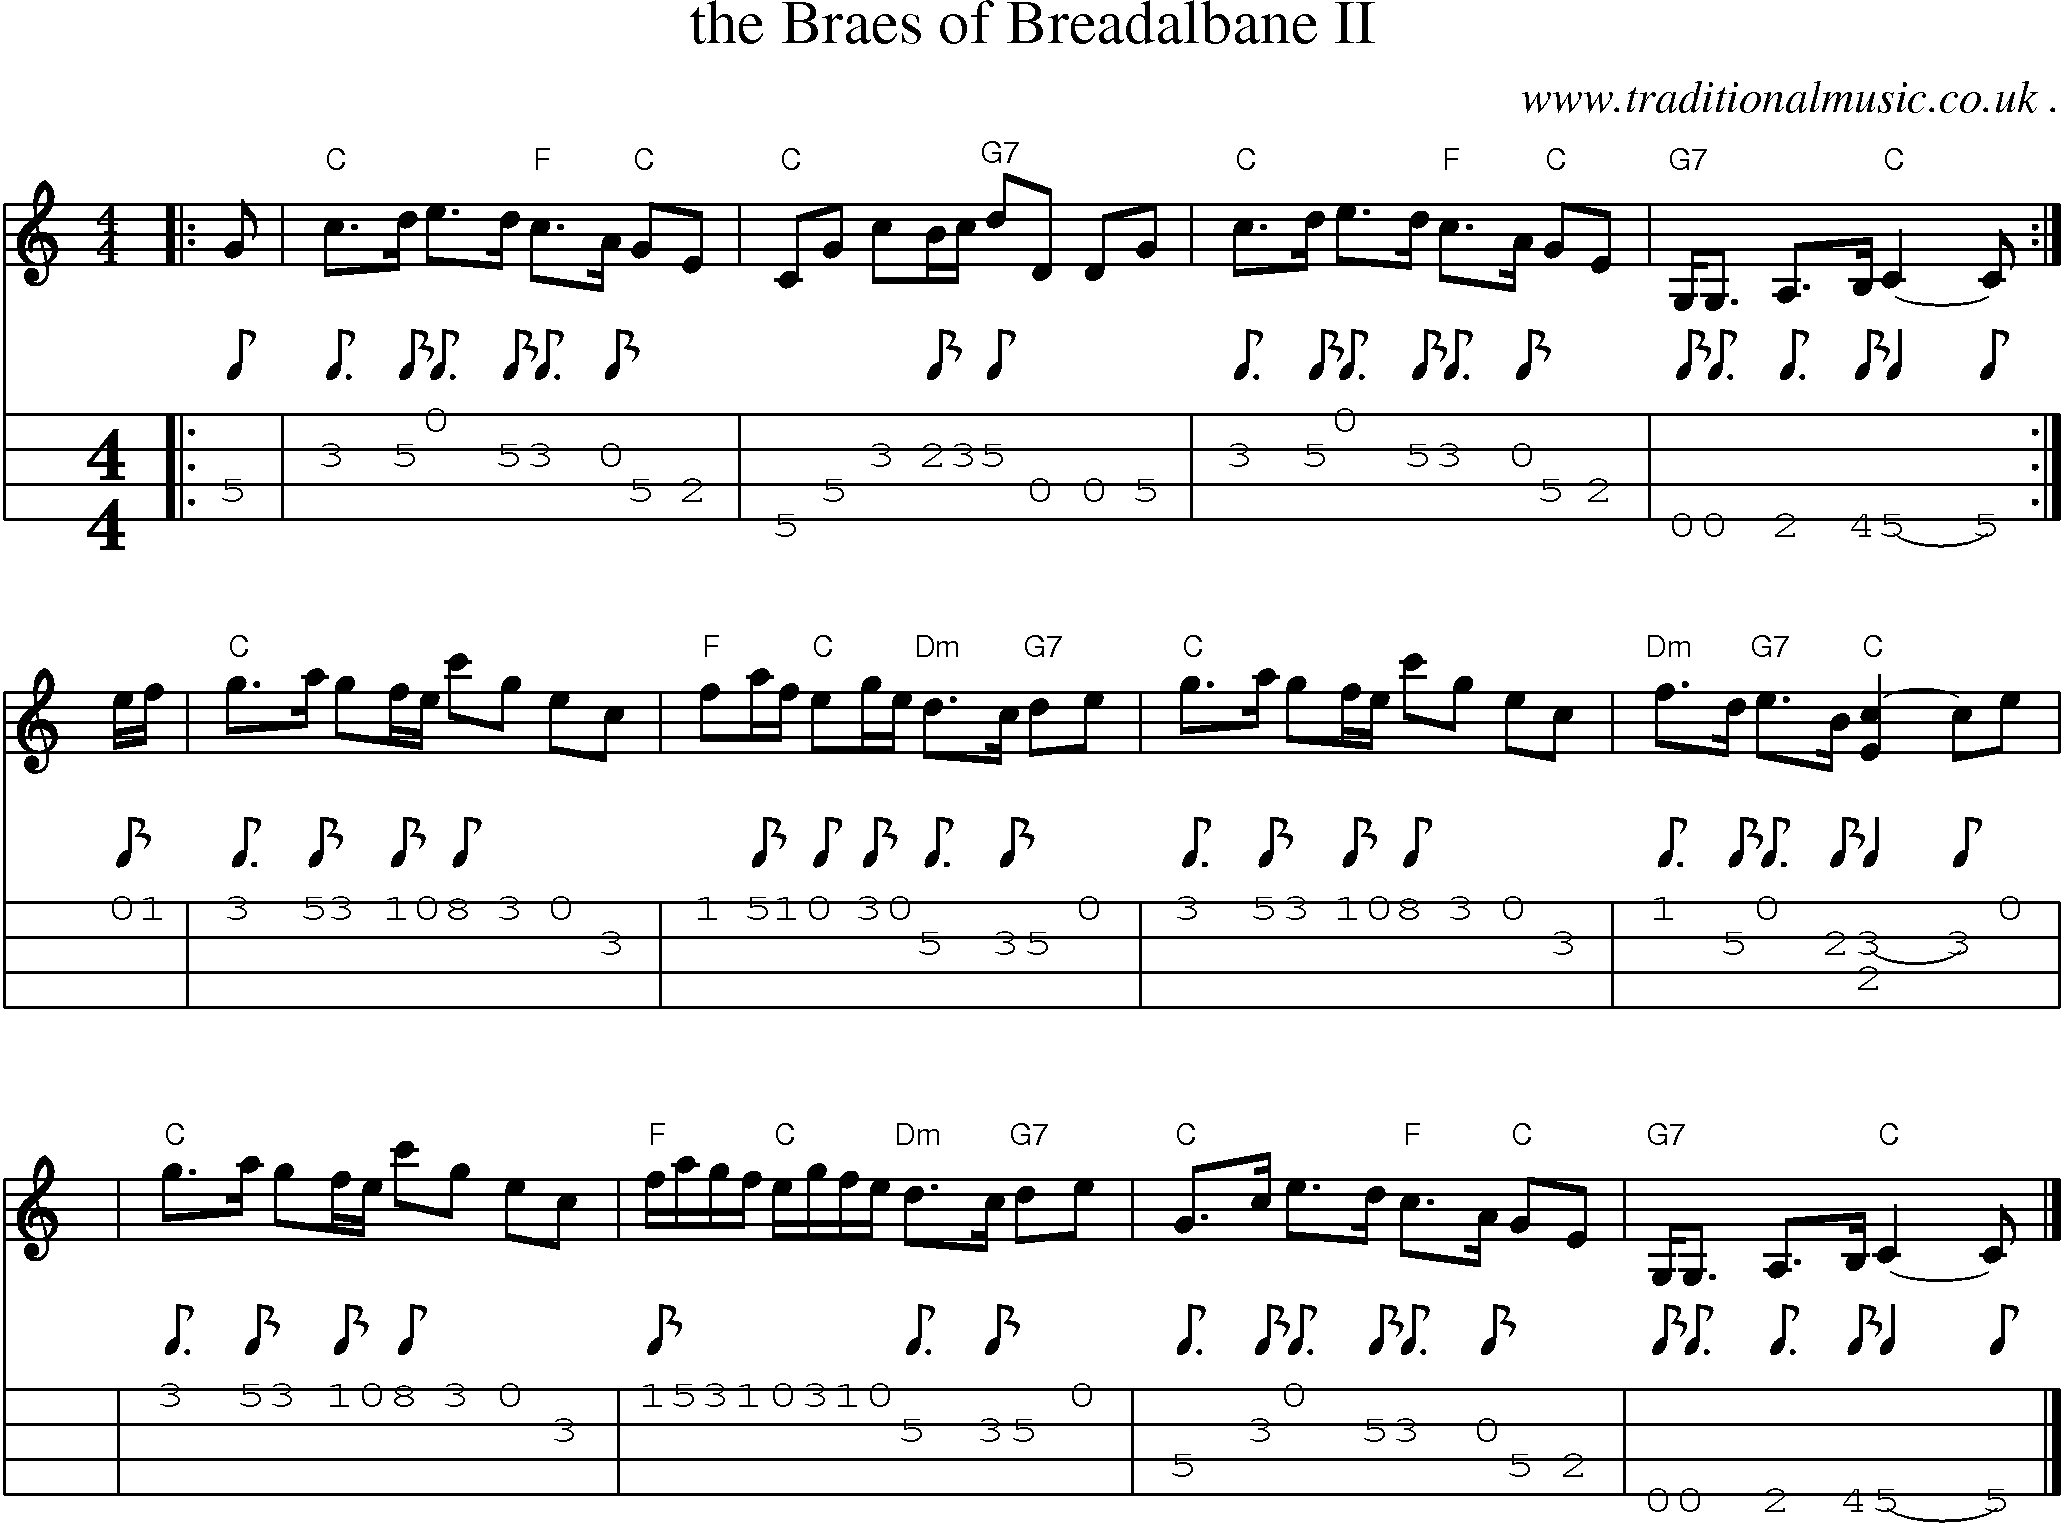 Sheet-music  score, Chords and Mandolin Tabs for The Braes Of Breadalbane Ii